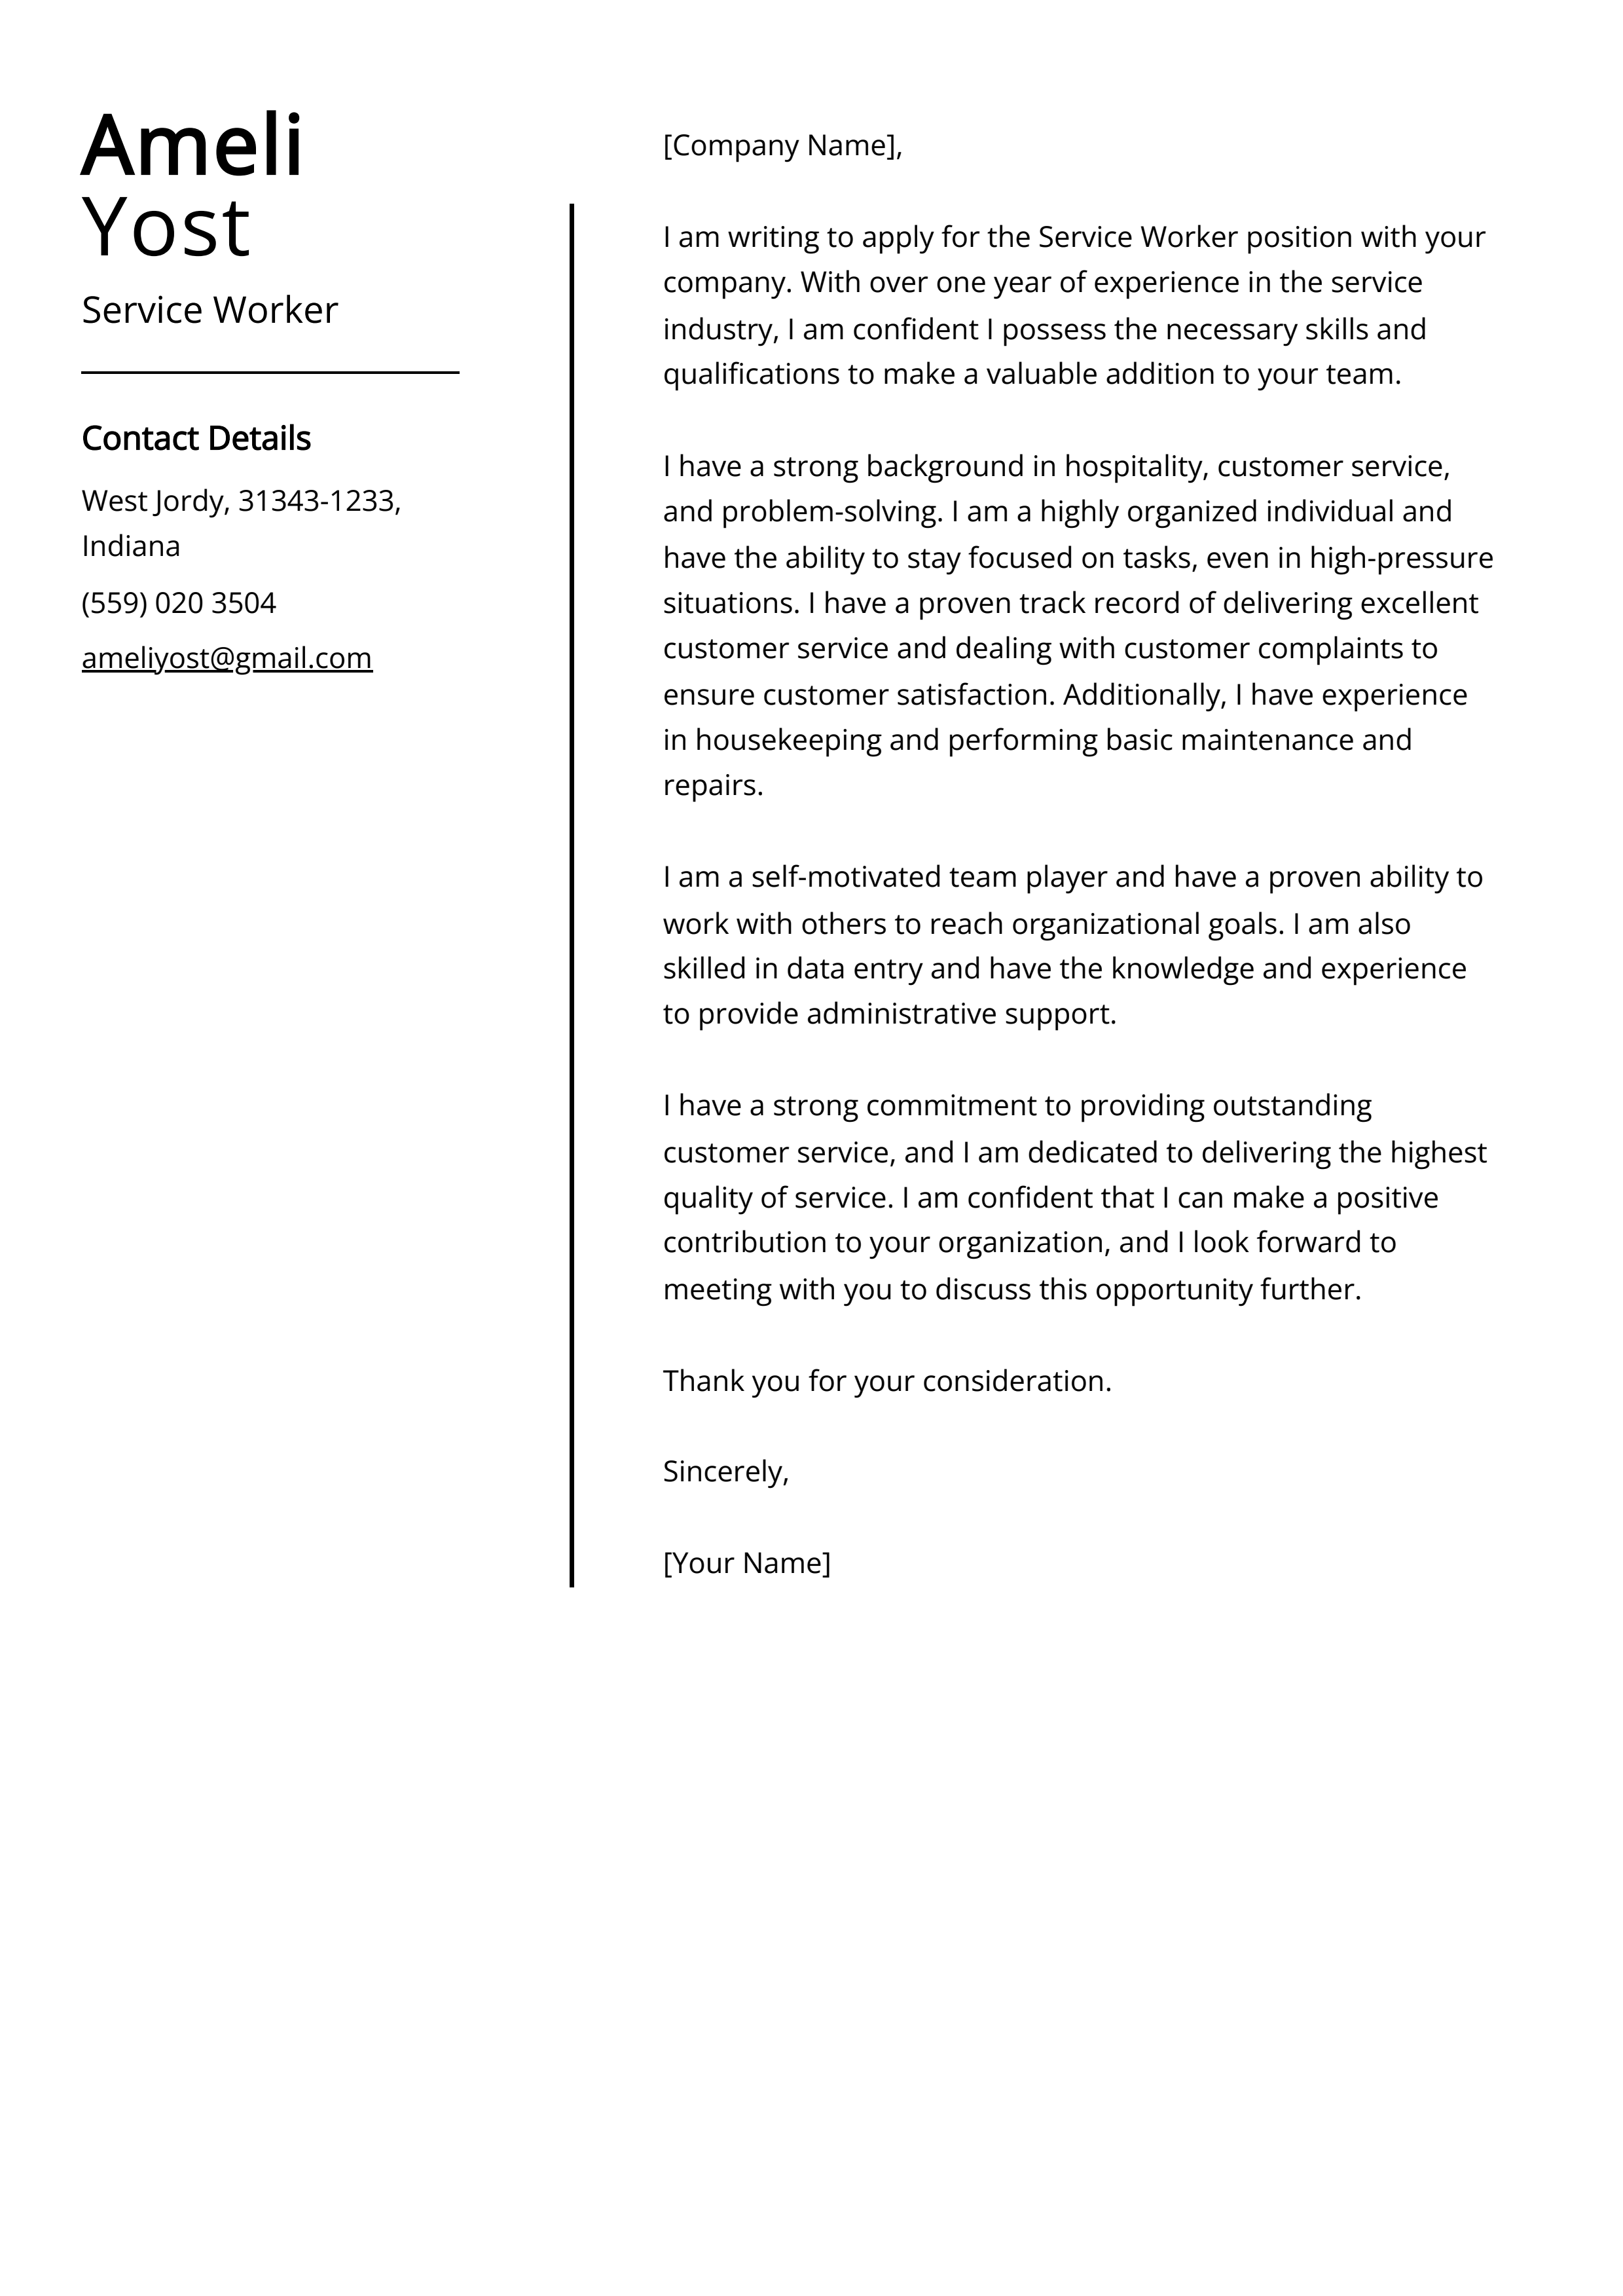 Service Worker Cover Letter Example